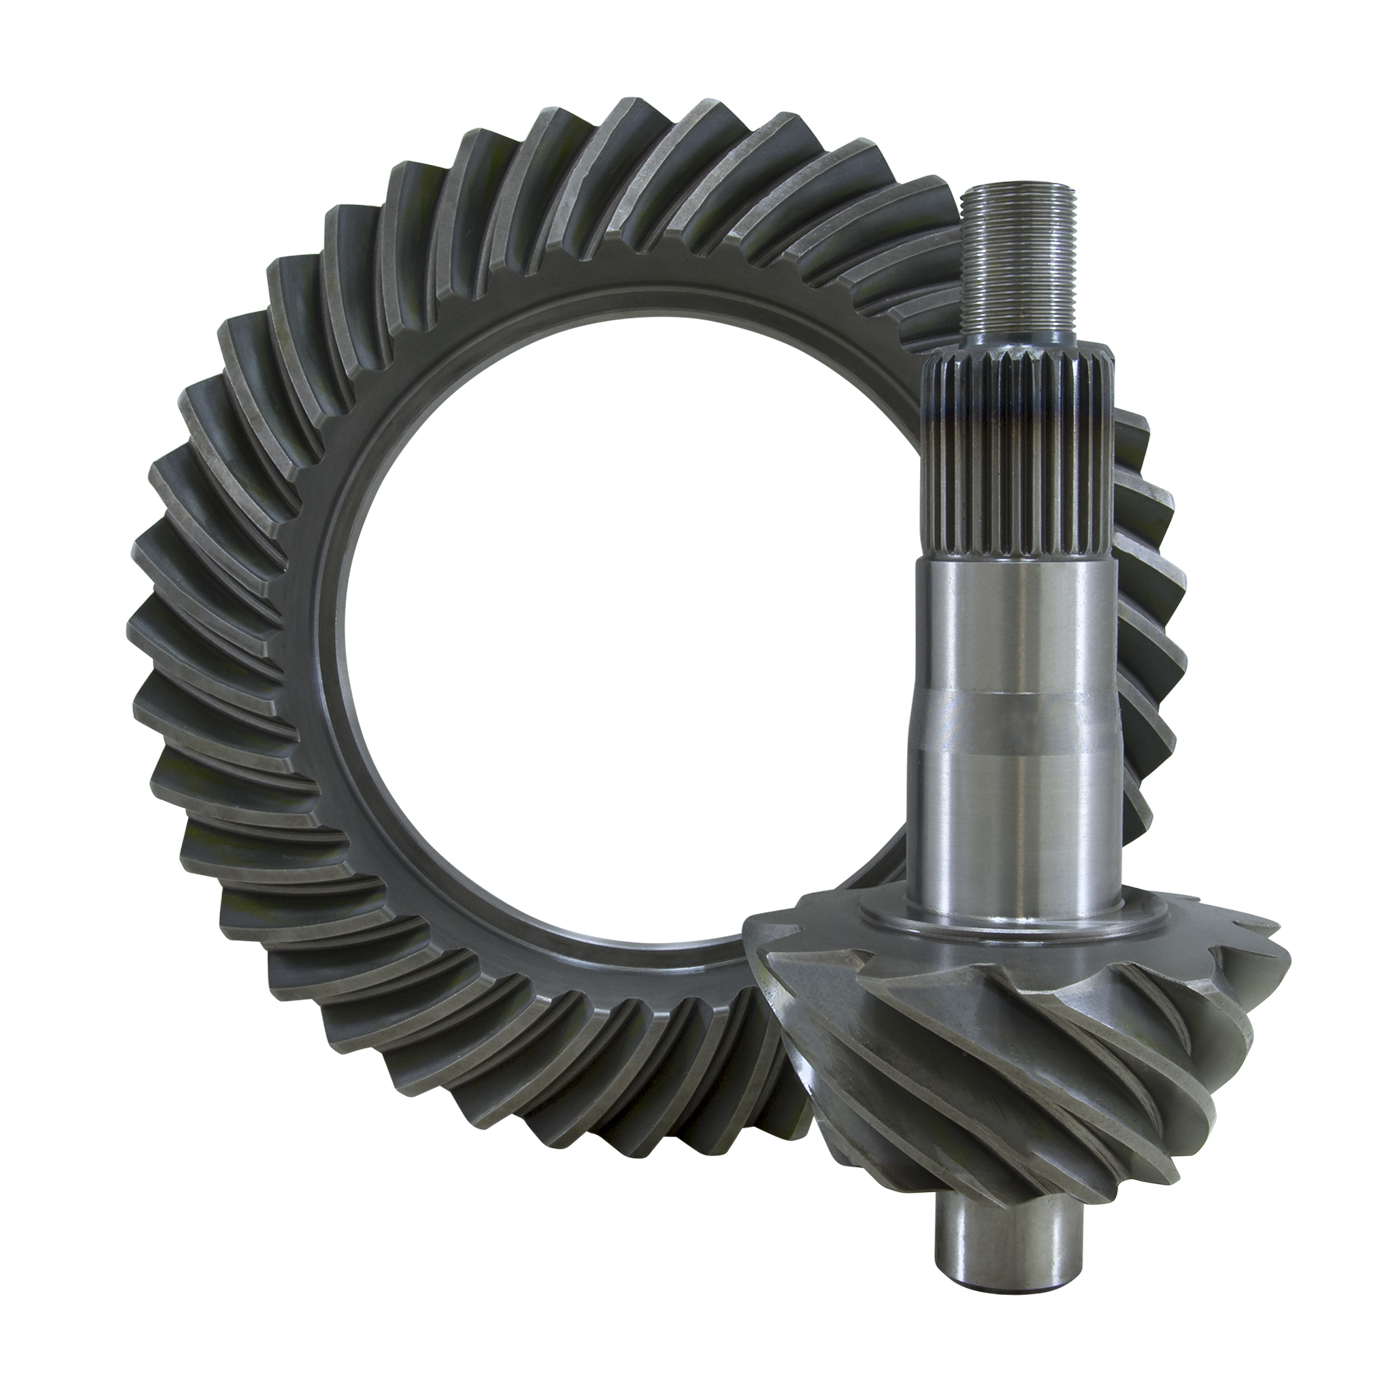 USA Standard Ring & Pinion set for 10.5" GM 14 bolt truck, 5.13 ratio, thick